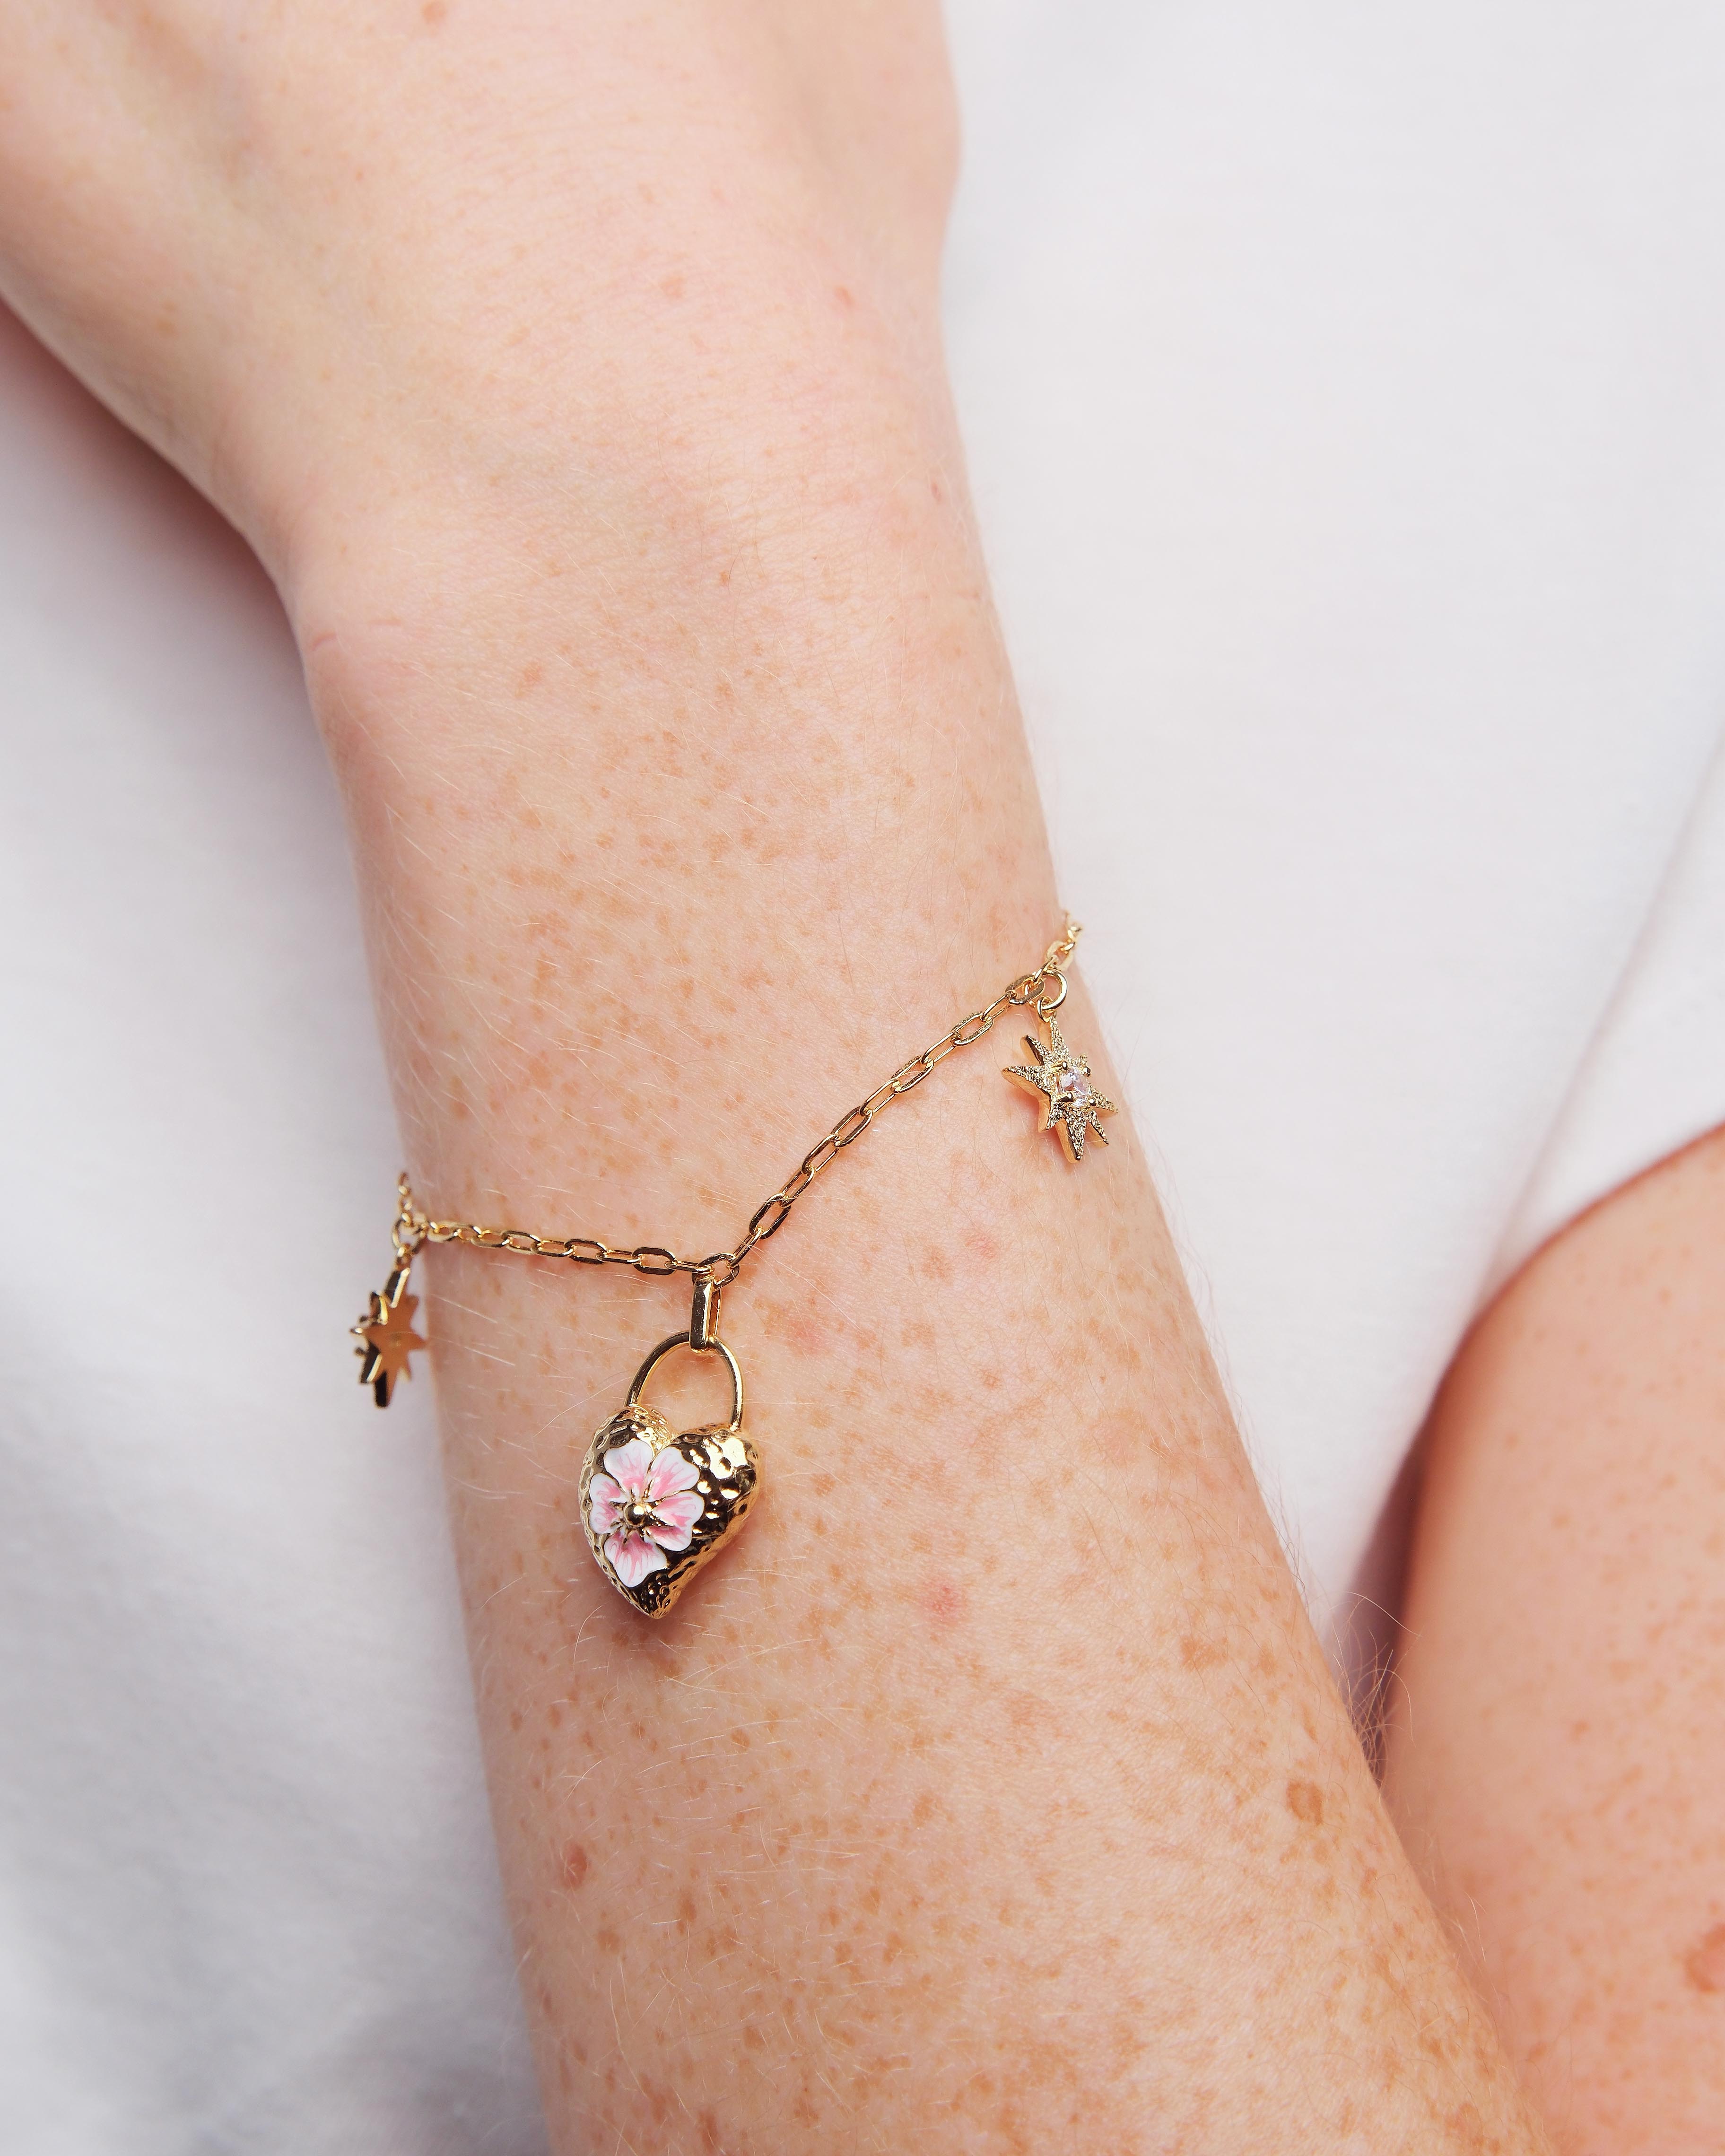 Star and pansy flower charm bracelet